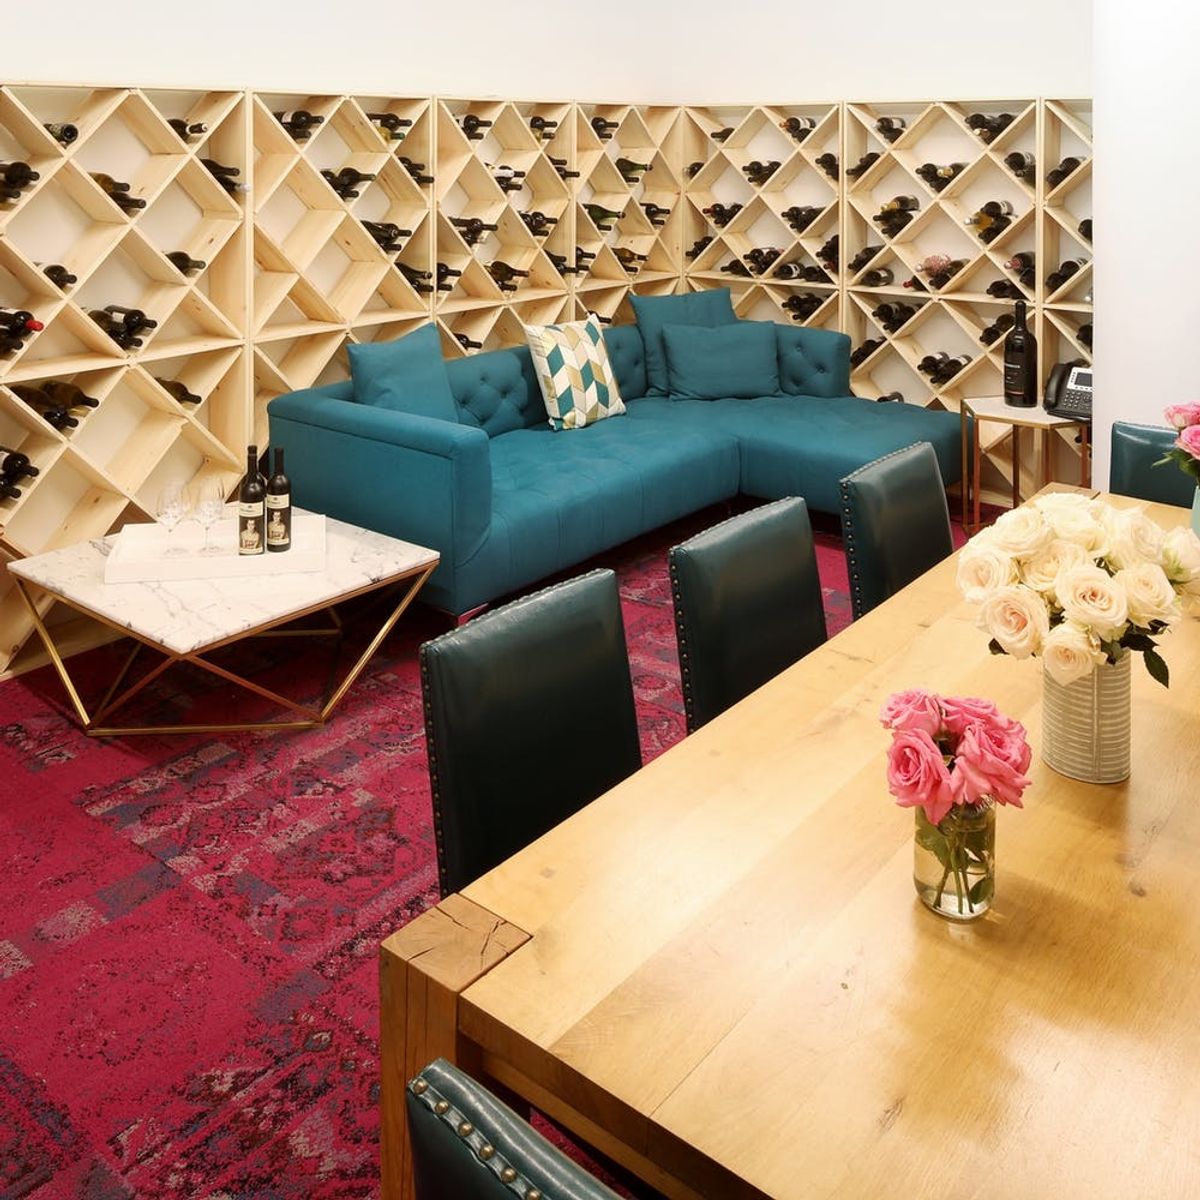 See How TheSkimm’s Office Makeover Geniusly Kept Its Homey Vibes